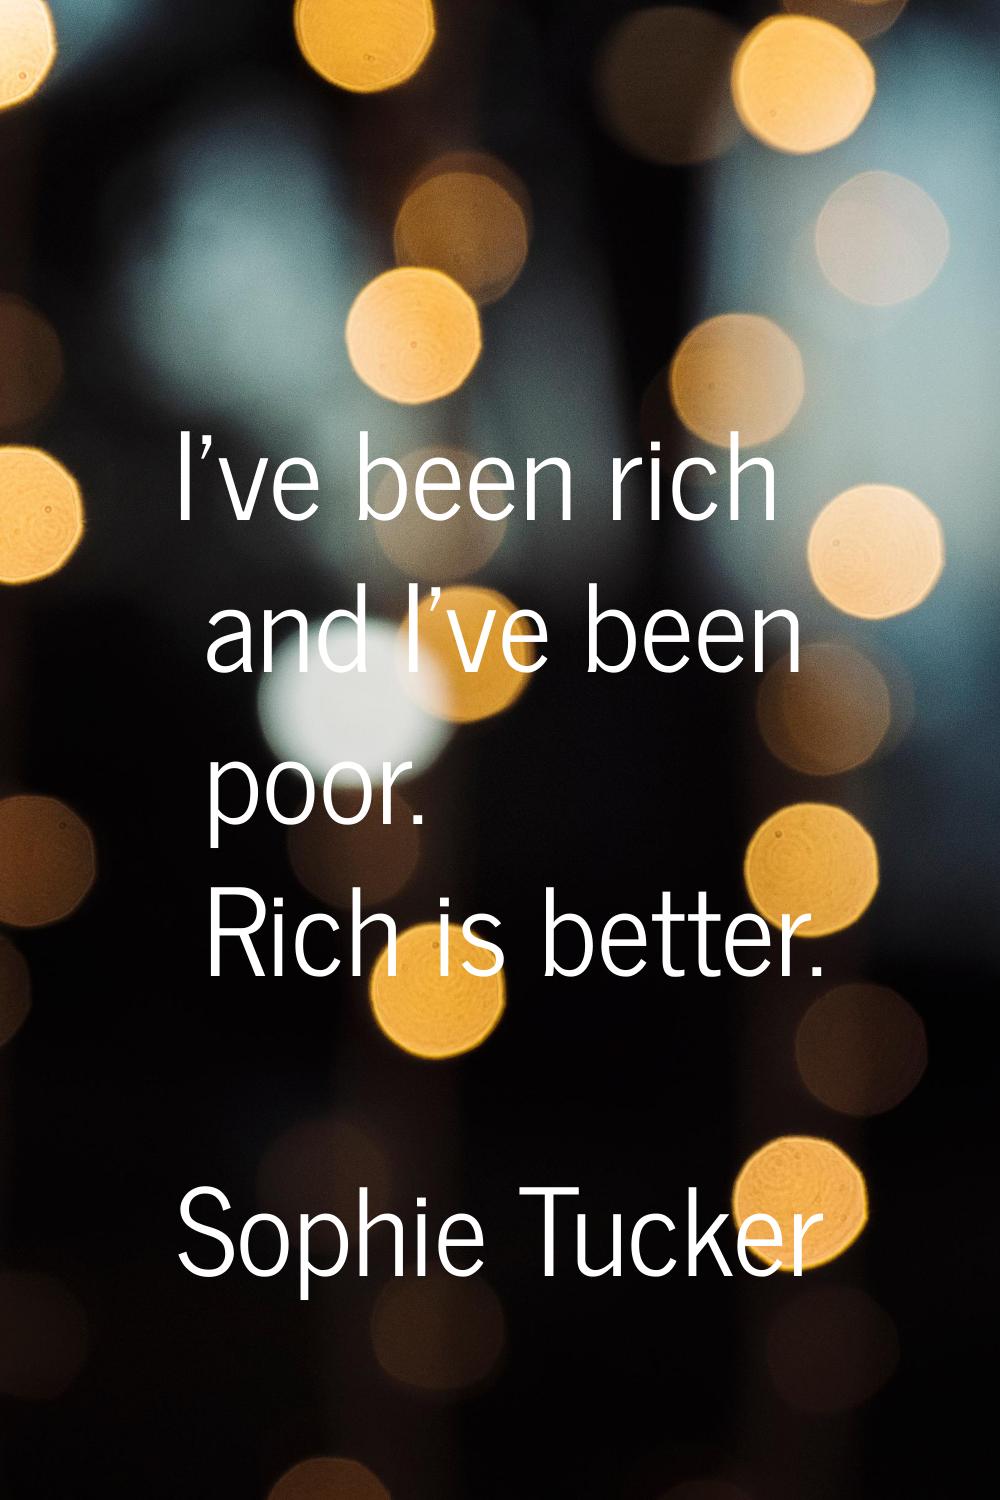 I've been rich and I've been poor. Rich is better.